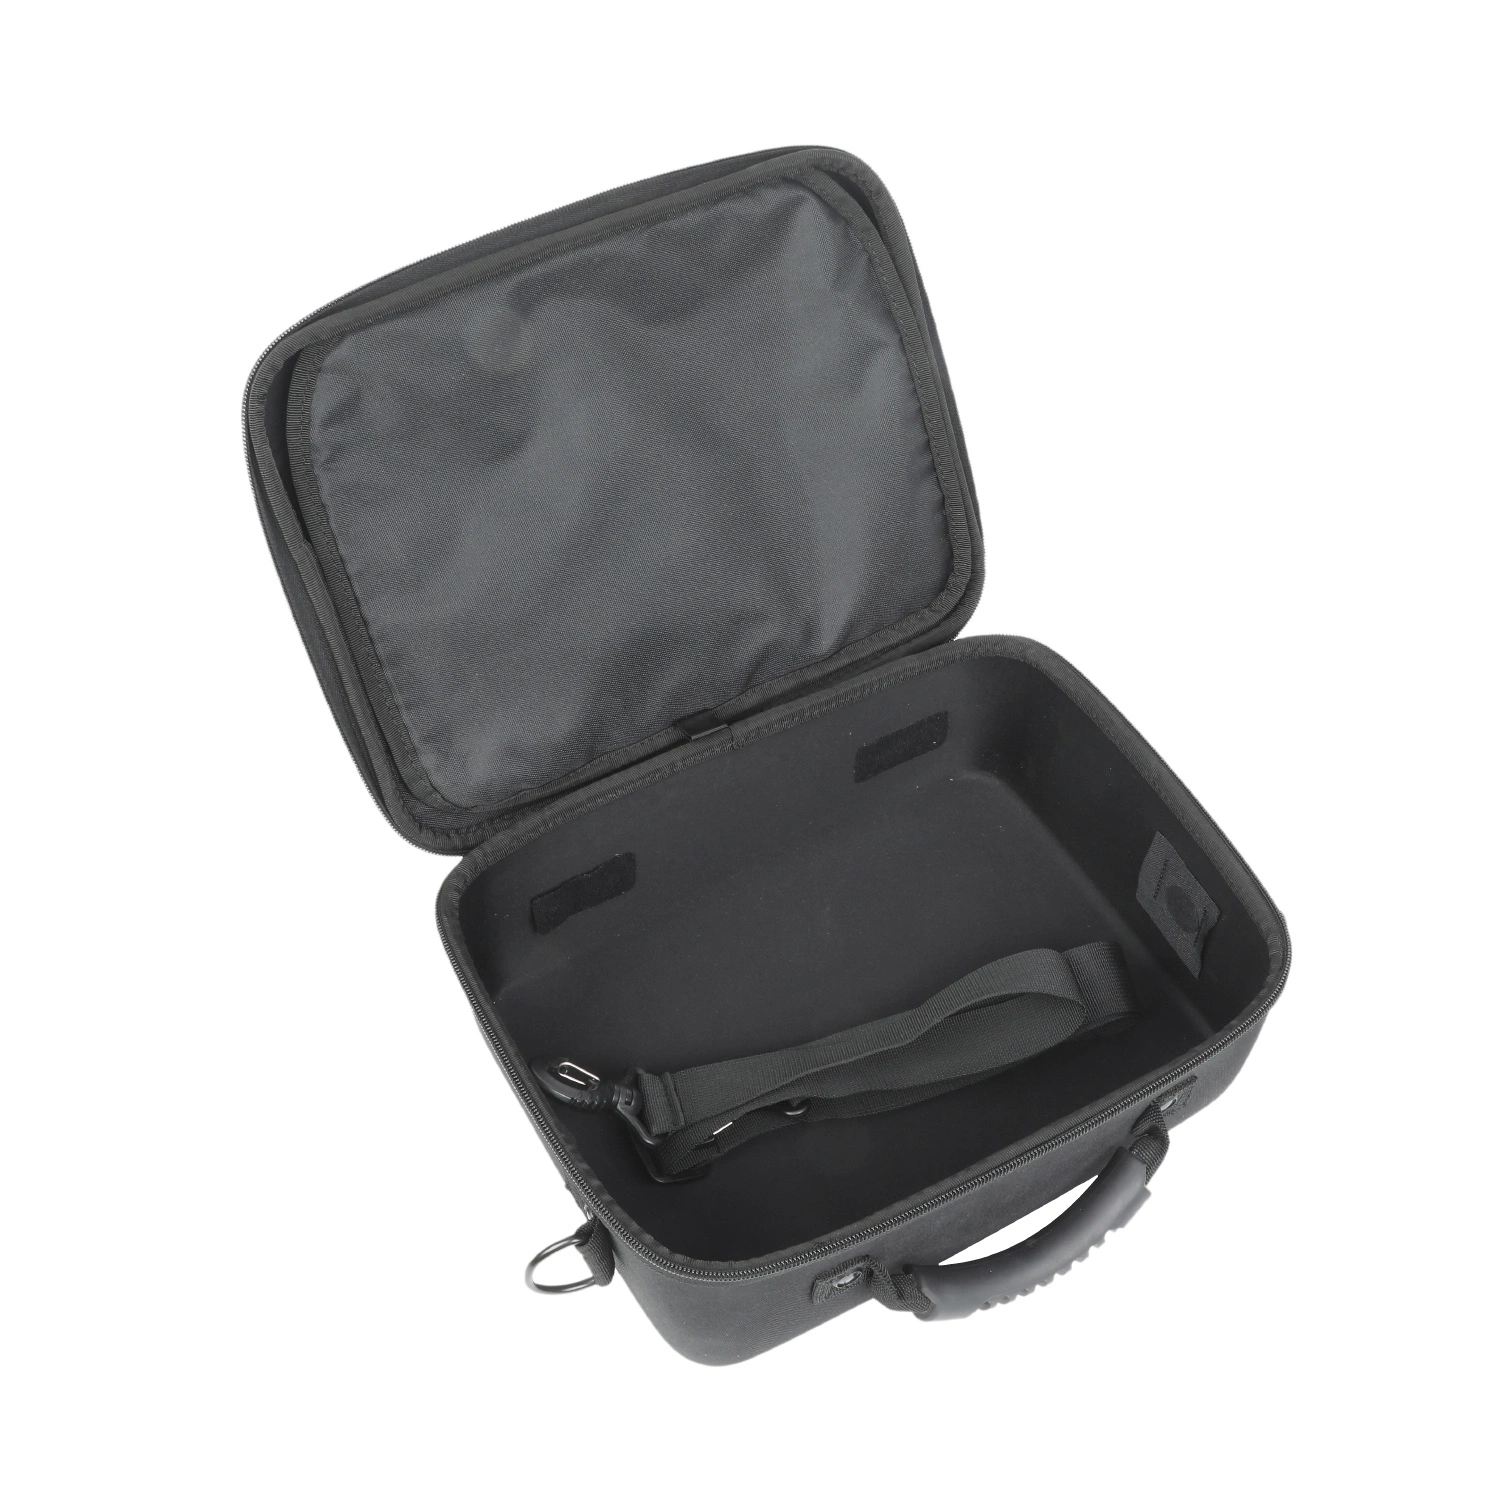 Special Purpose Bags EVA Case for Portable Organizer Electronics Cables Accessories